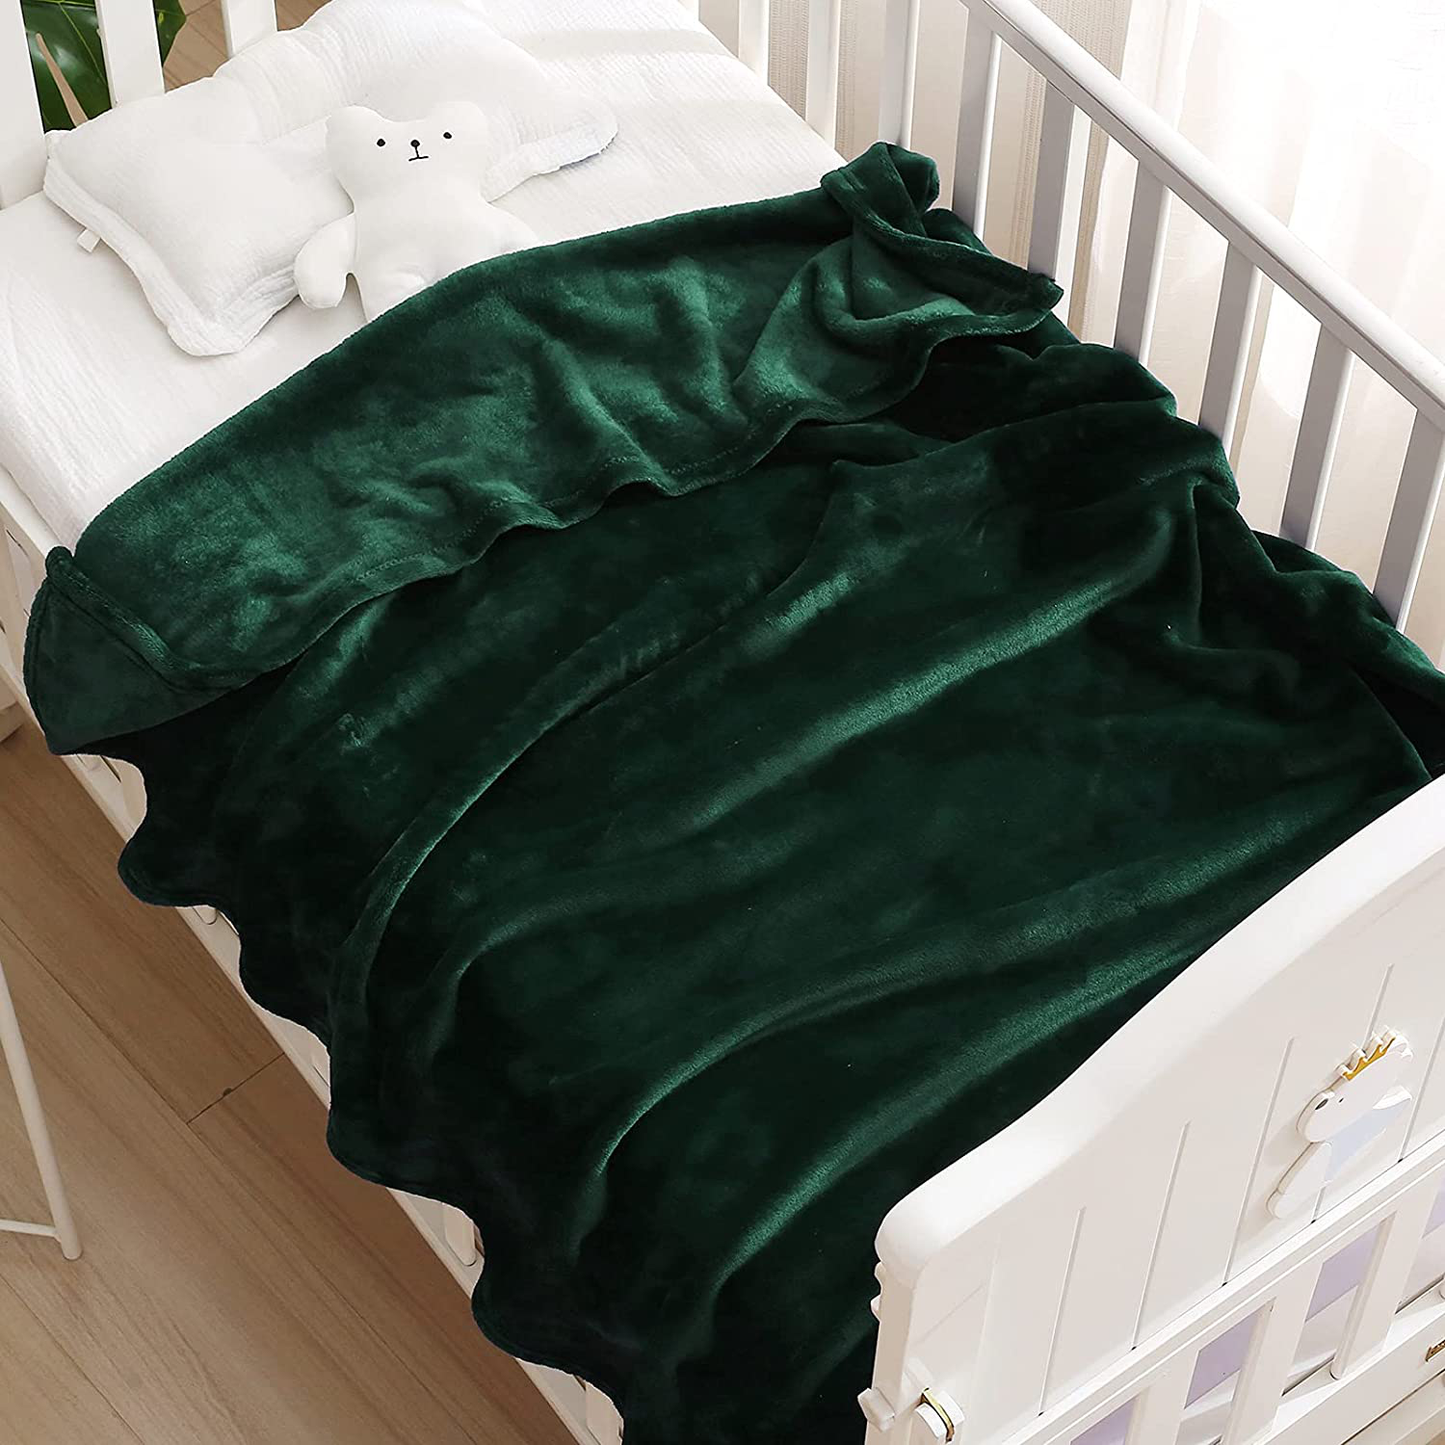 Exclusivo Mezcla Soft Fleece Baby Blanket Baby Swaddle Blanket Boys, Girls, Infant, Newborn Receiving Blankets Toddler and Kids Blankets for Crib Stroller (30x40 inches, Forest Green)